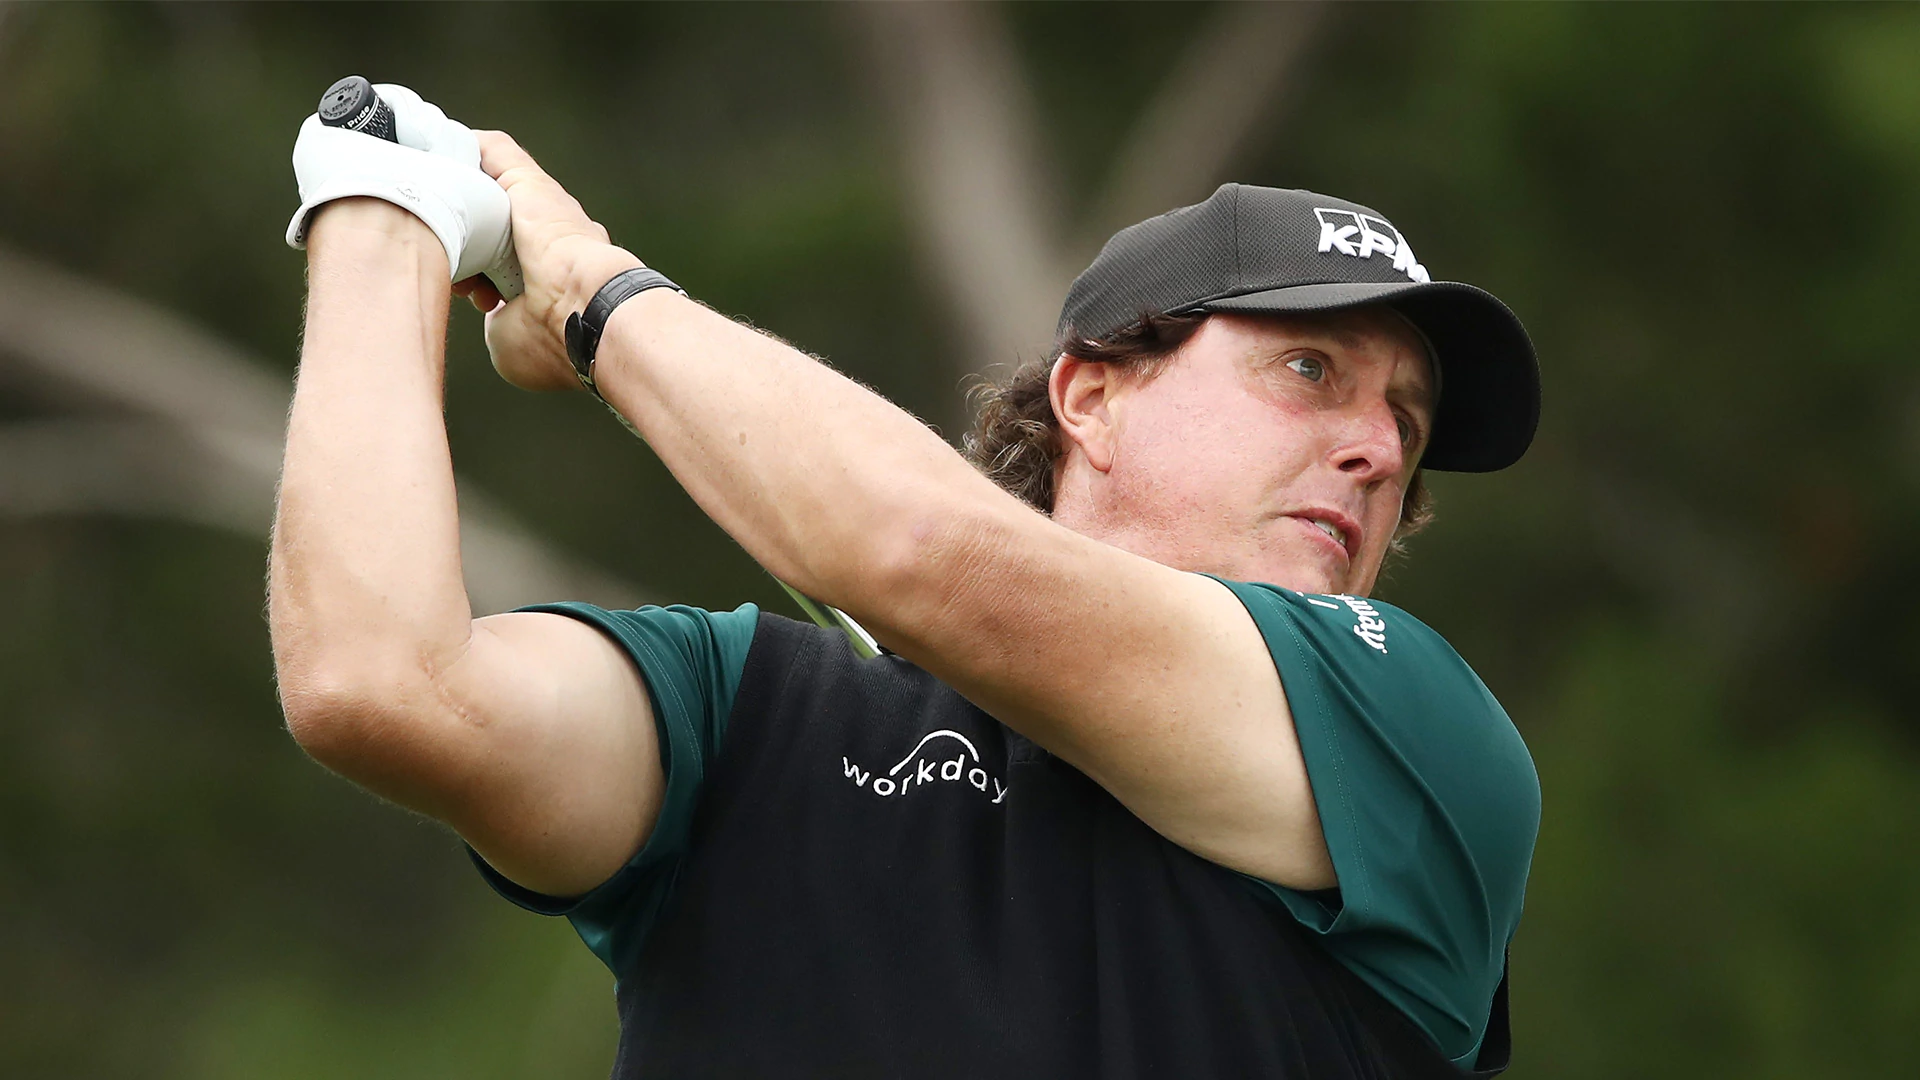 Without pre-Masters tune-up, Mickelson unsure how he'll play